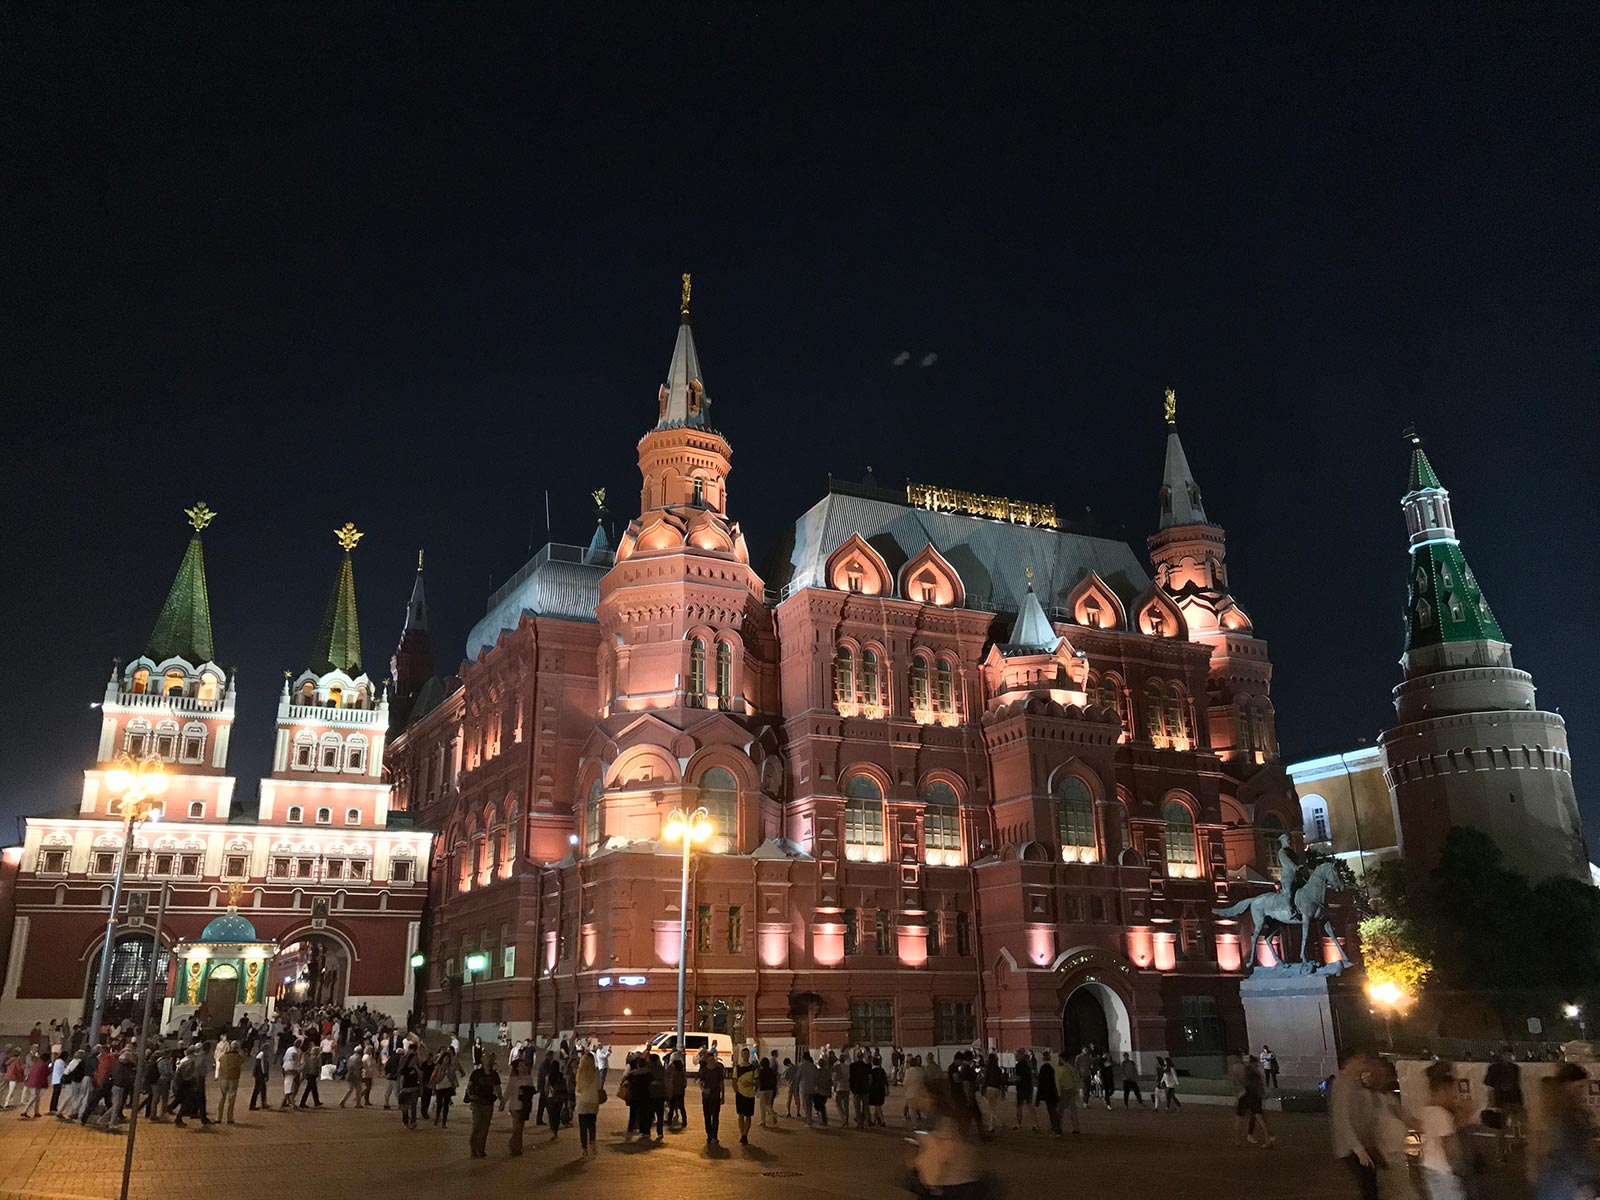 Red Square at night in Moscow, Russia. Shocked by Moscow